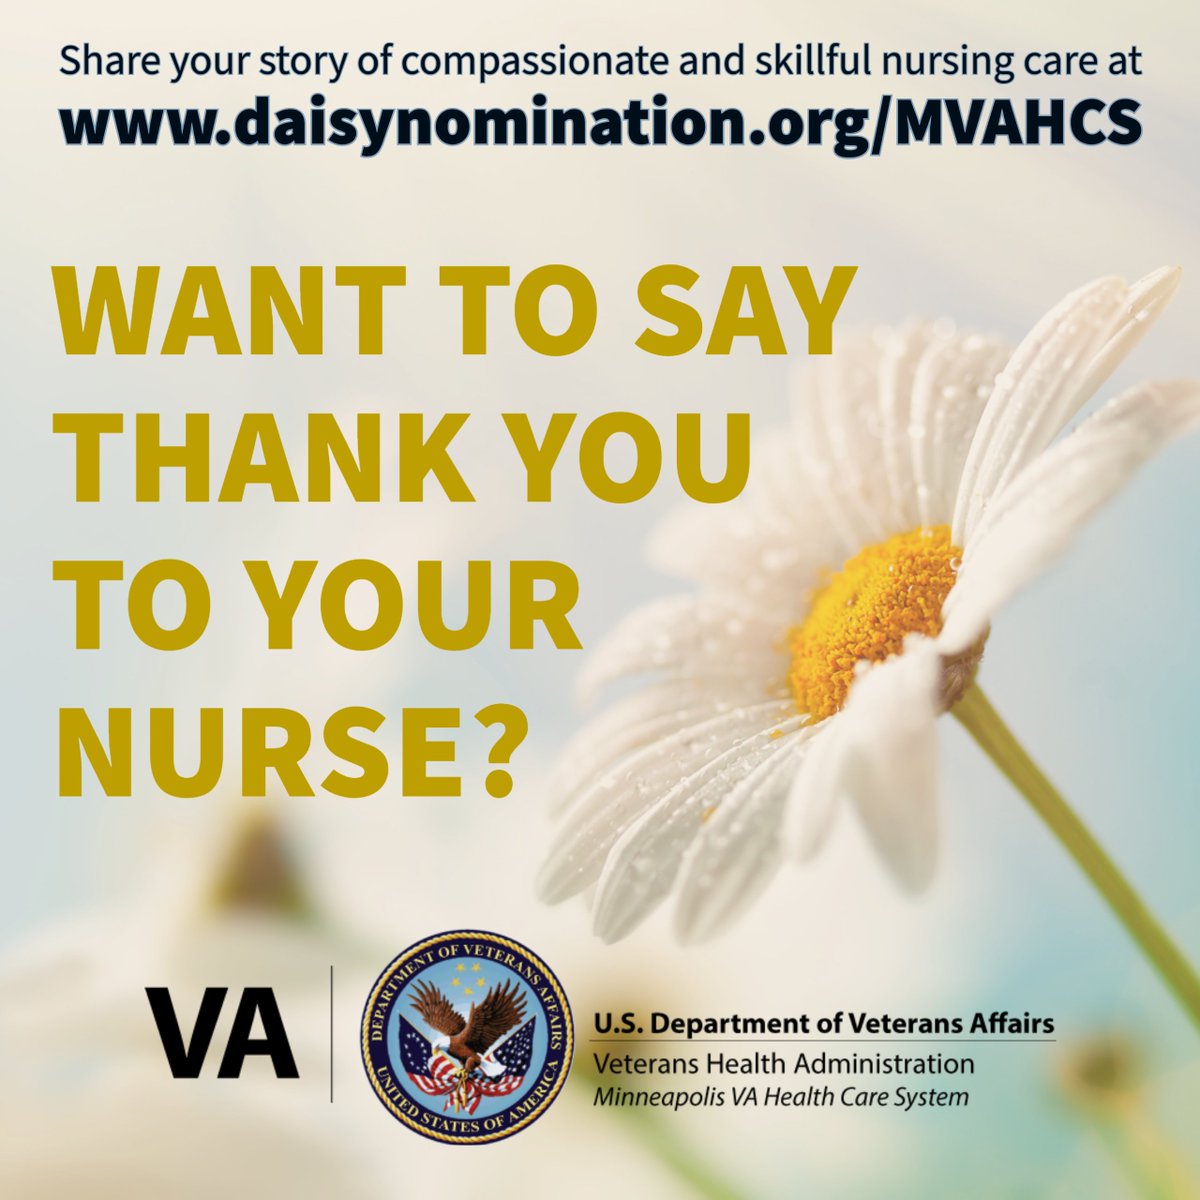 Want to say thank you to your nurse? 🌼 Share your story of compassionate and skillful nursing care and nominate them for The DAISY Award® For Extraordinary Nurses (The DAISY Award): daisynomination.org/MVAHCS